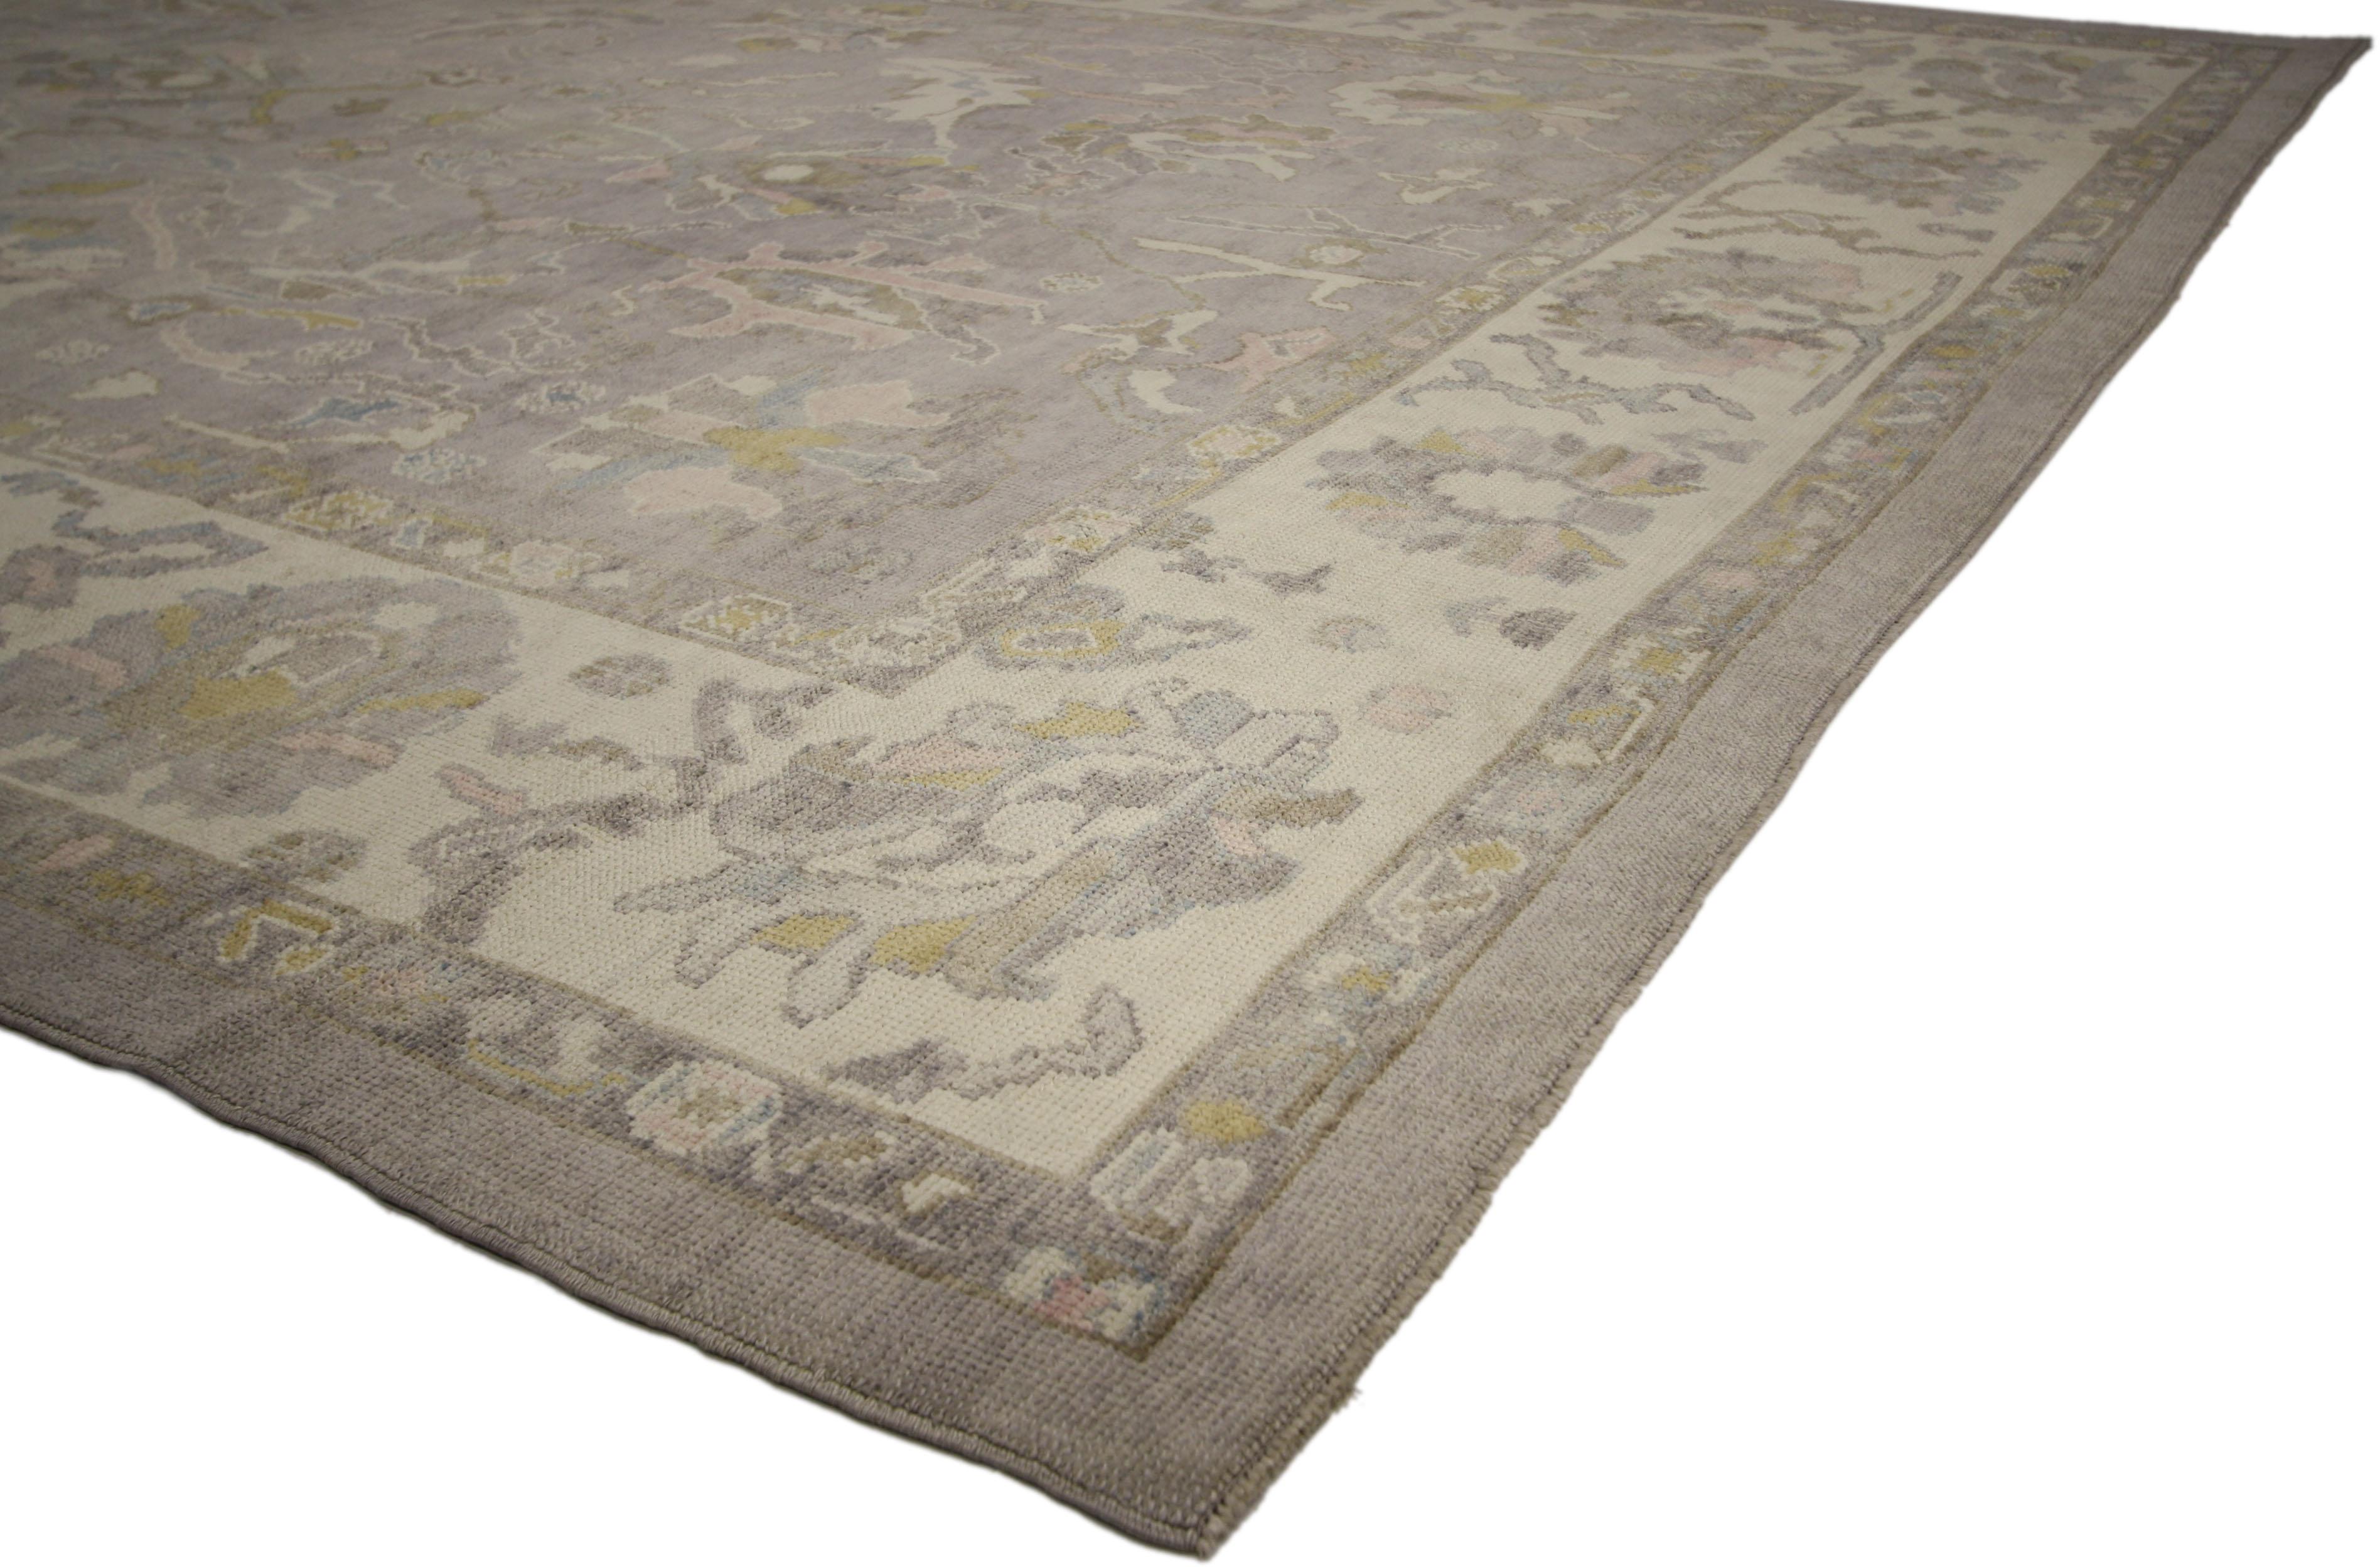 Wool Rustic Farmhouse New Turkish Oushak Area Rug with Light, Neutral Colors